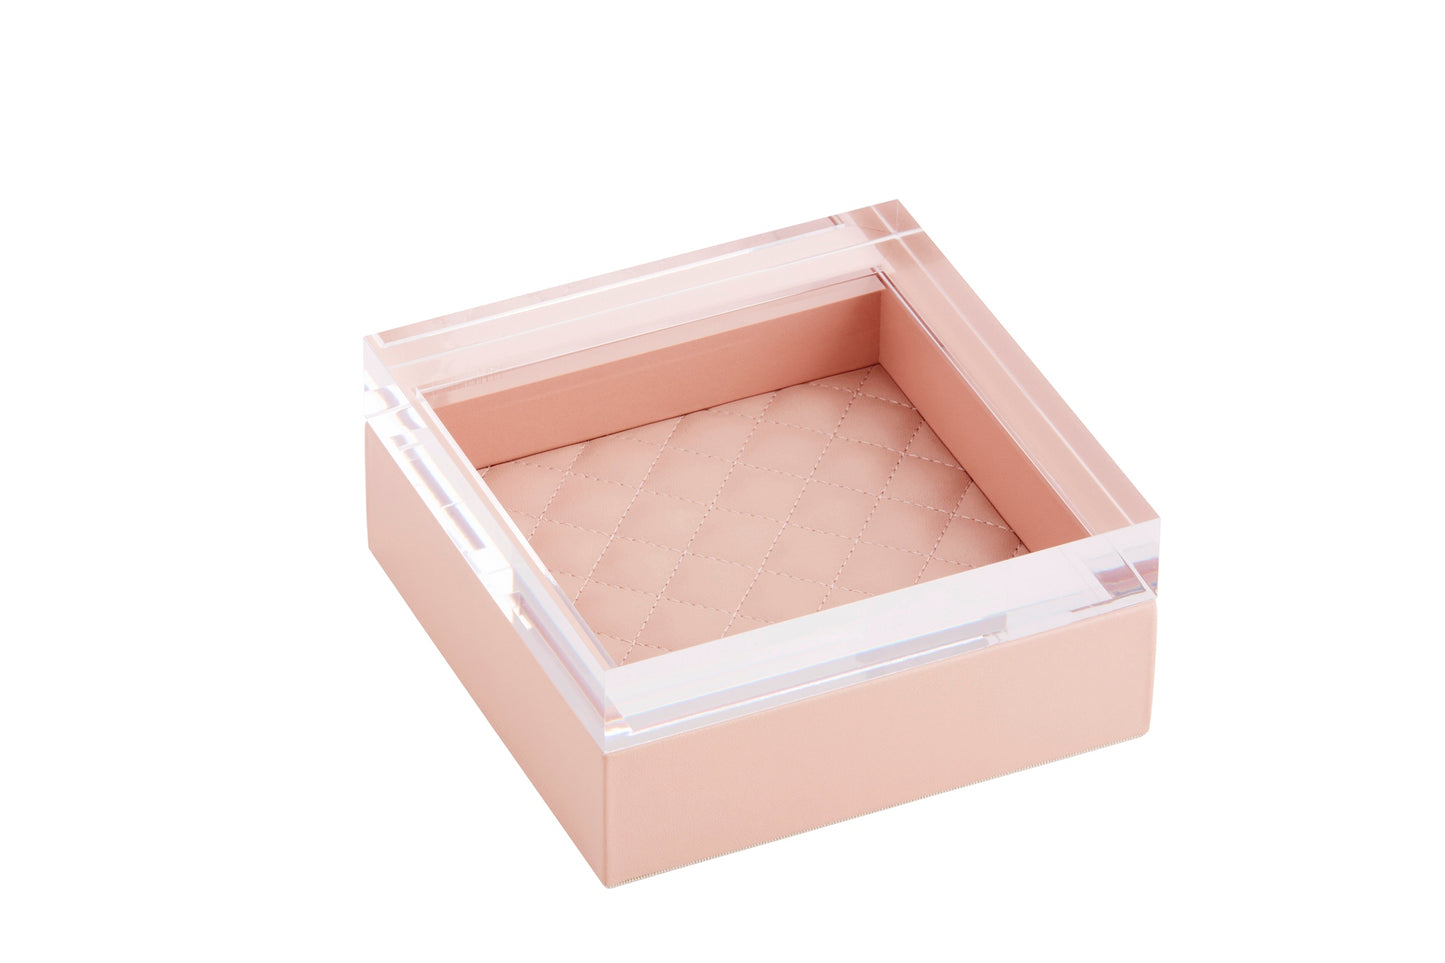 Febe Diamonds Box Square by Riviere | Leather box with acrylic lid and quilted diamonds padded lining. | Home Decor and Storage | 2Jour Concierge, your luxury lifestyle shop